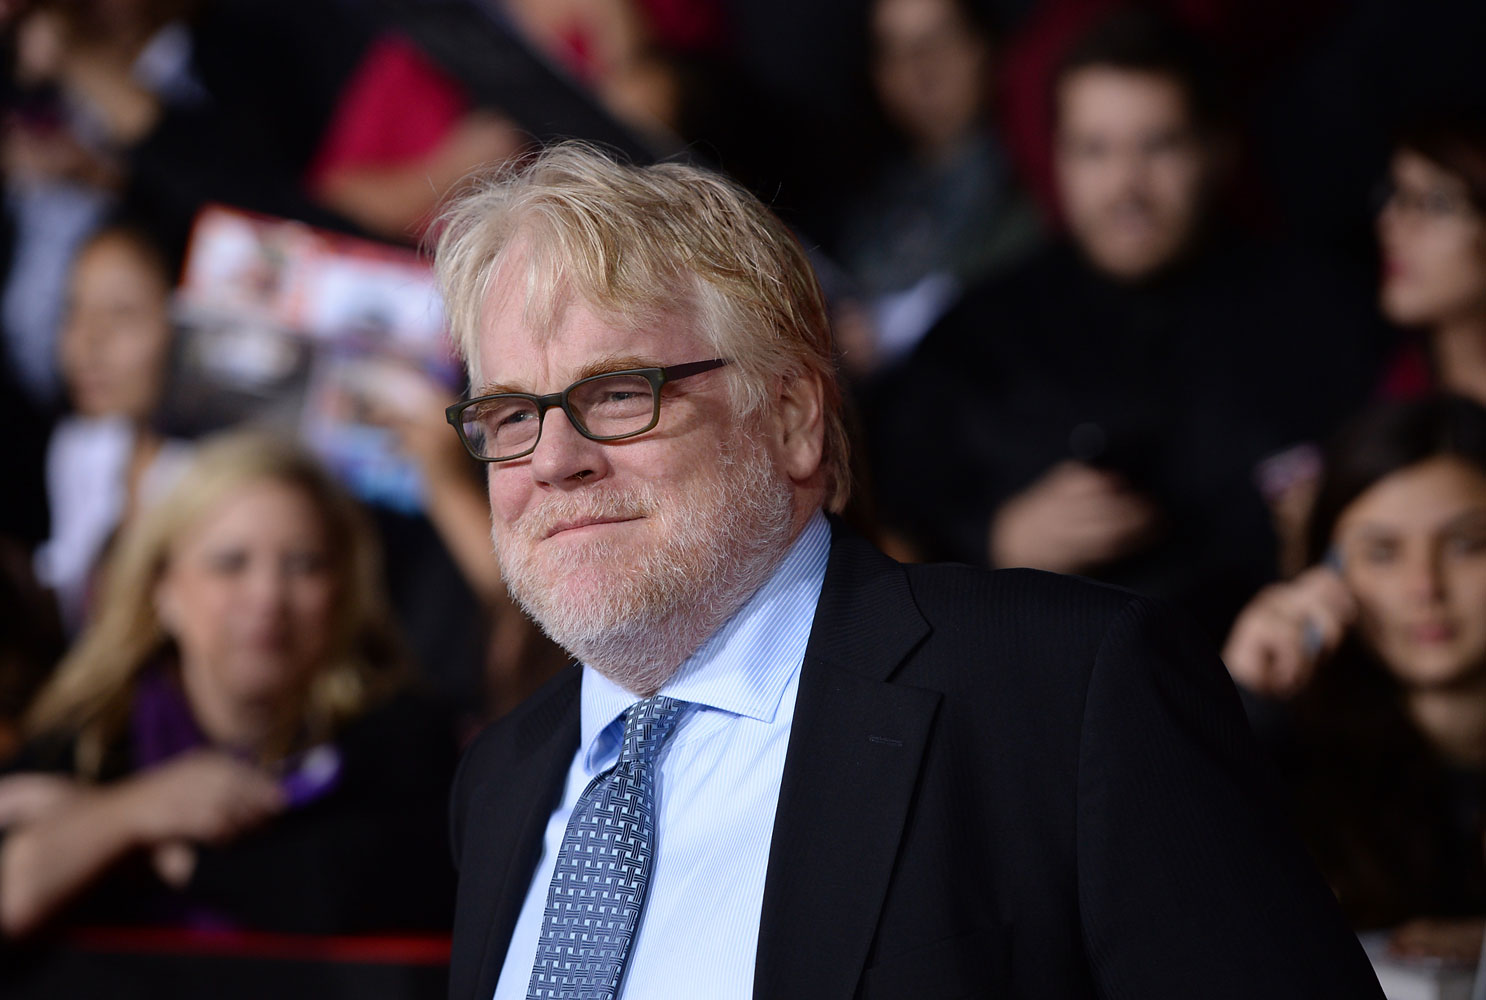 Philip Seymour Hoffman in Los Angeles, Nov. 18, 2013. (Robyn Beck / AFP / Getty Images)